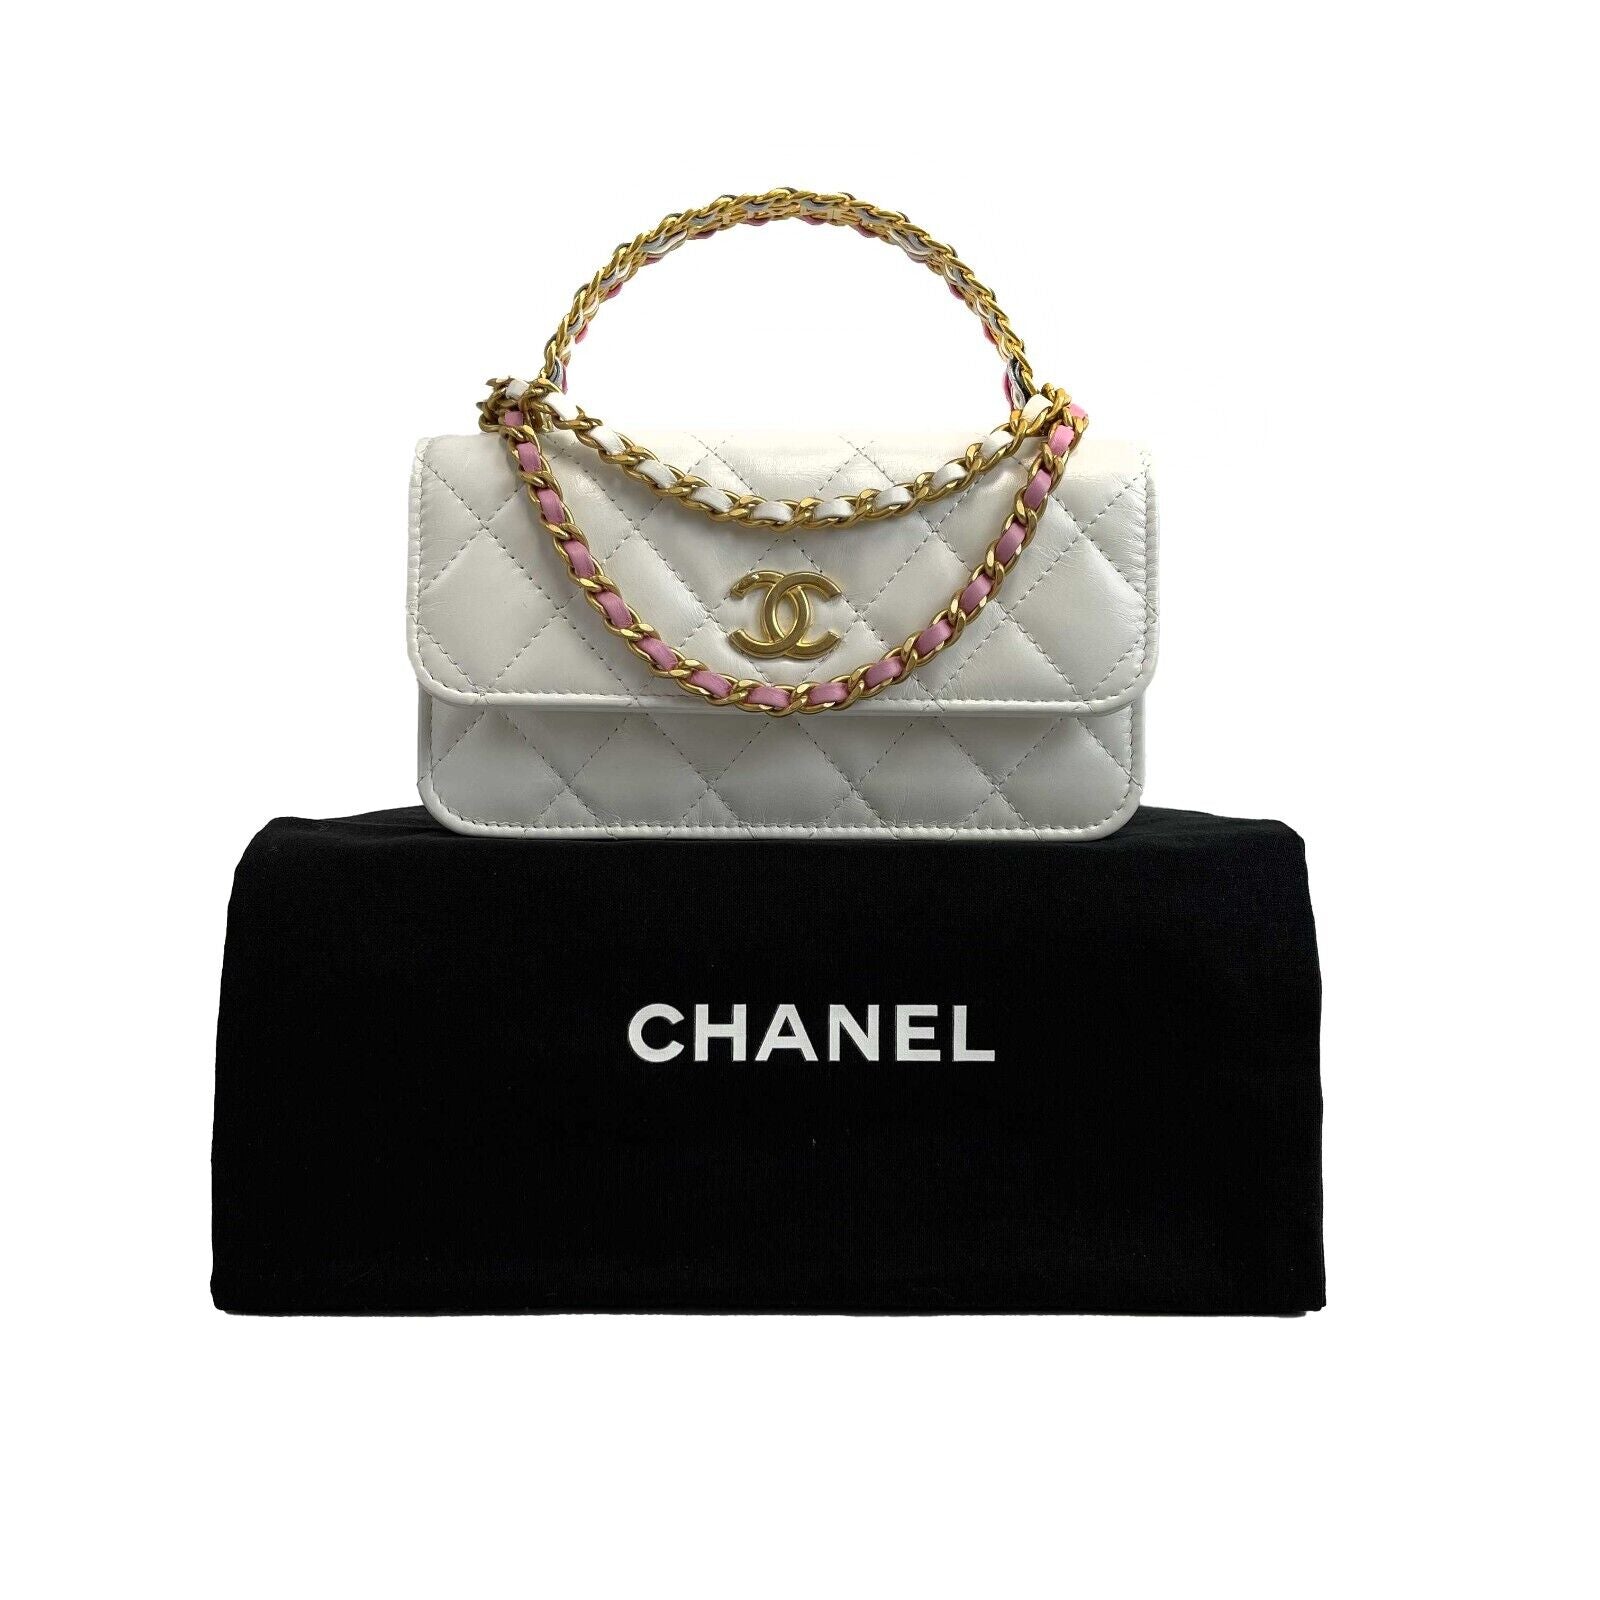 CHANEL - Phone Holder Quilted White Lambskin CC 'CHANEL' Top